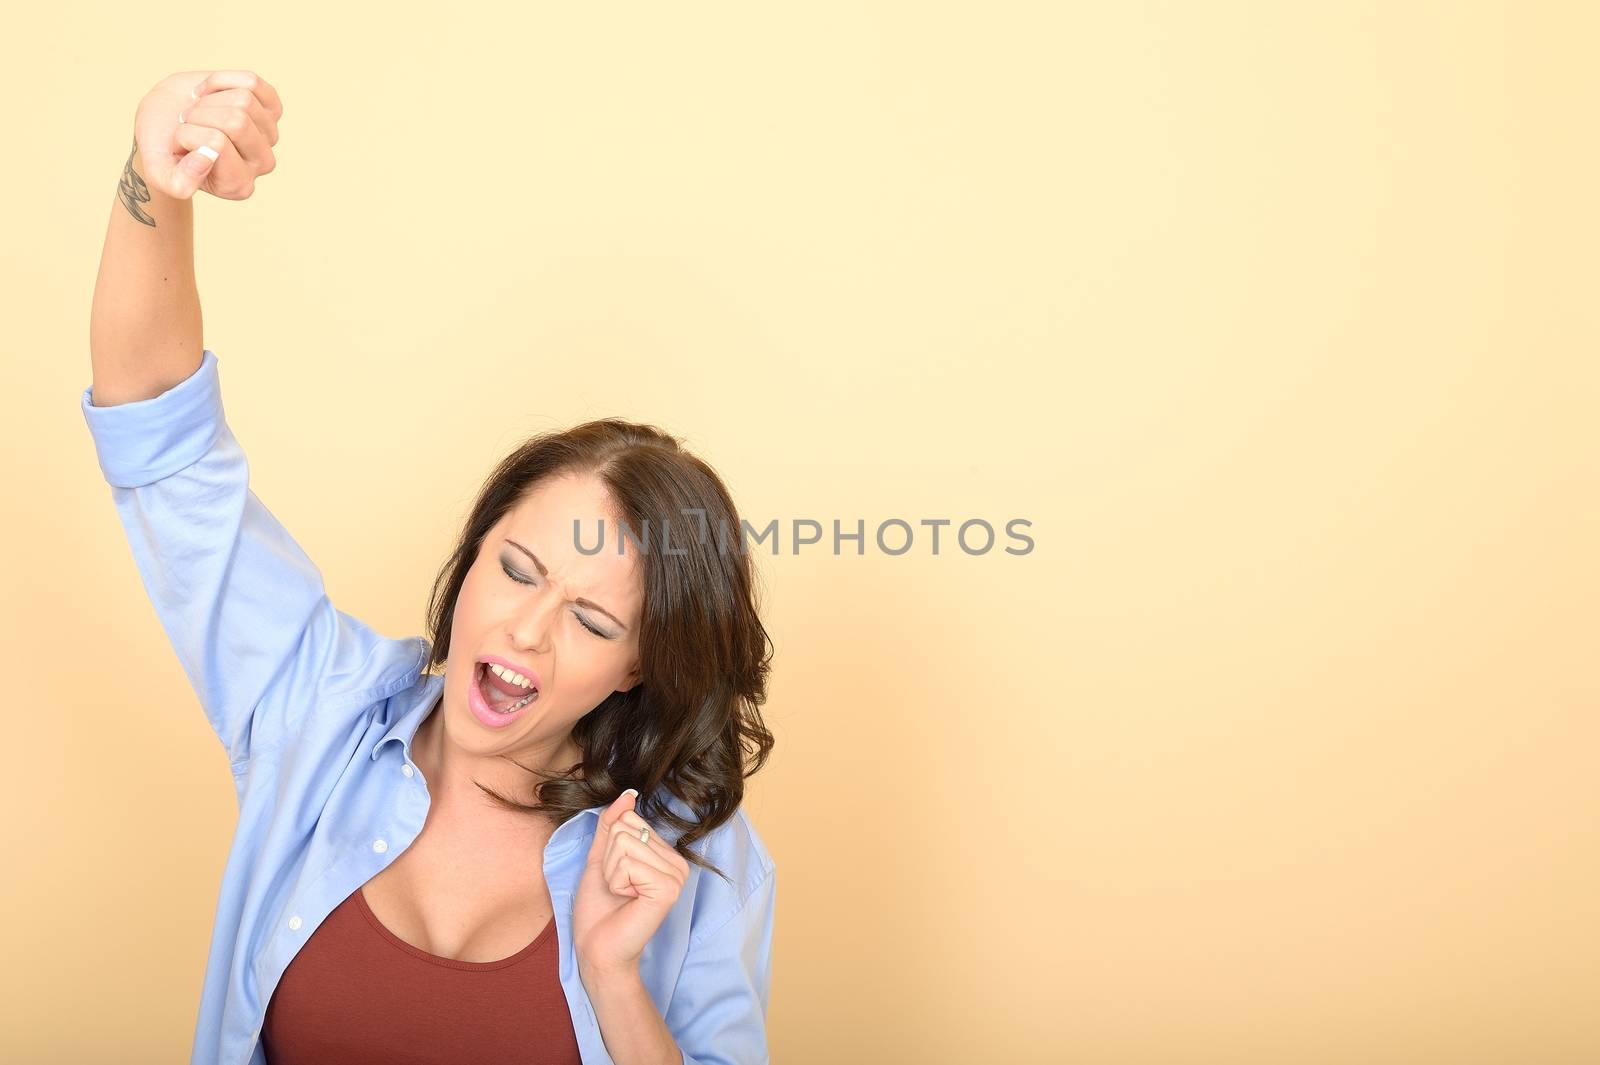 Attractive Young Woman Sitting on the Floor Wearing a Blue Shirt and White Jeans Stretching and Yawning